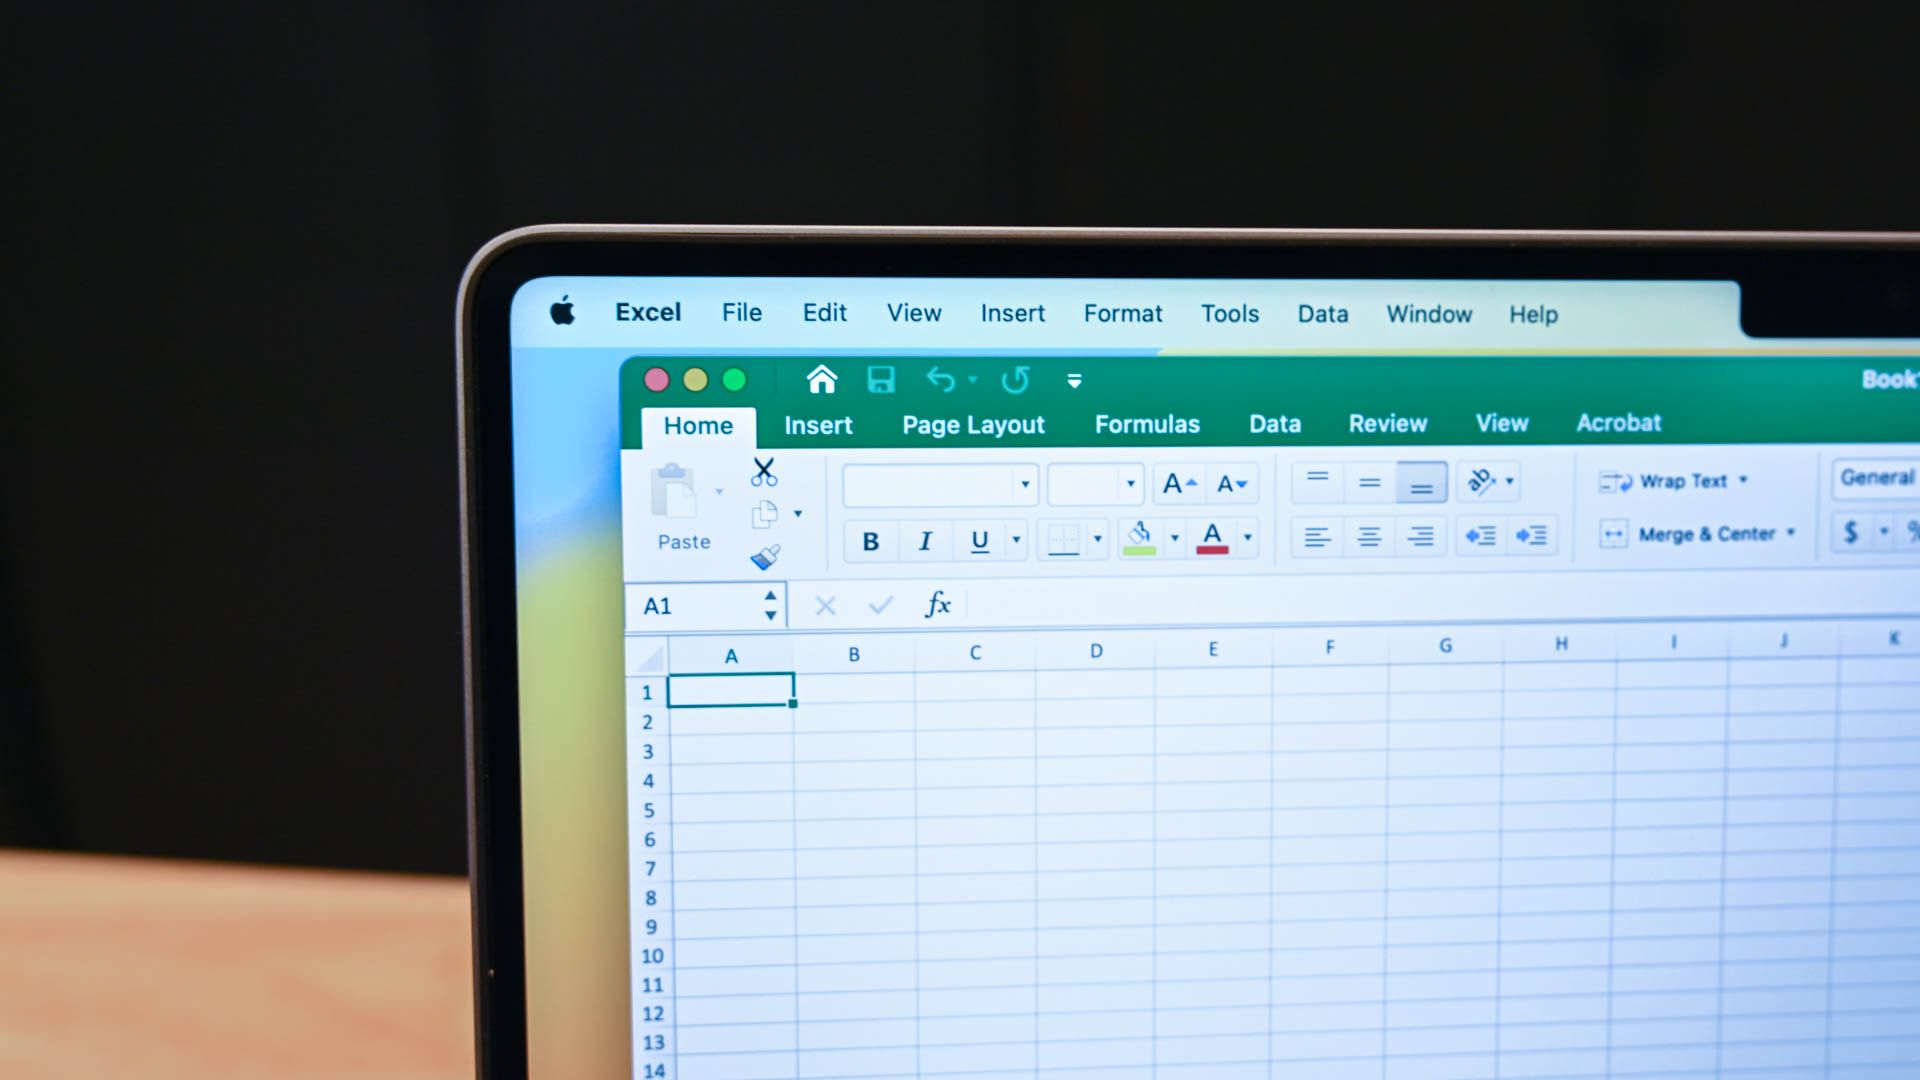 Excel open on a Mac